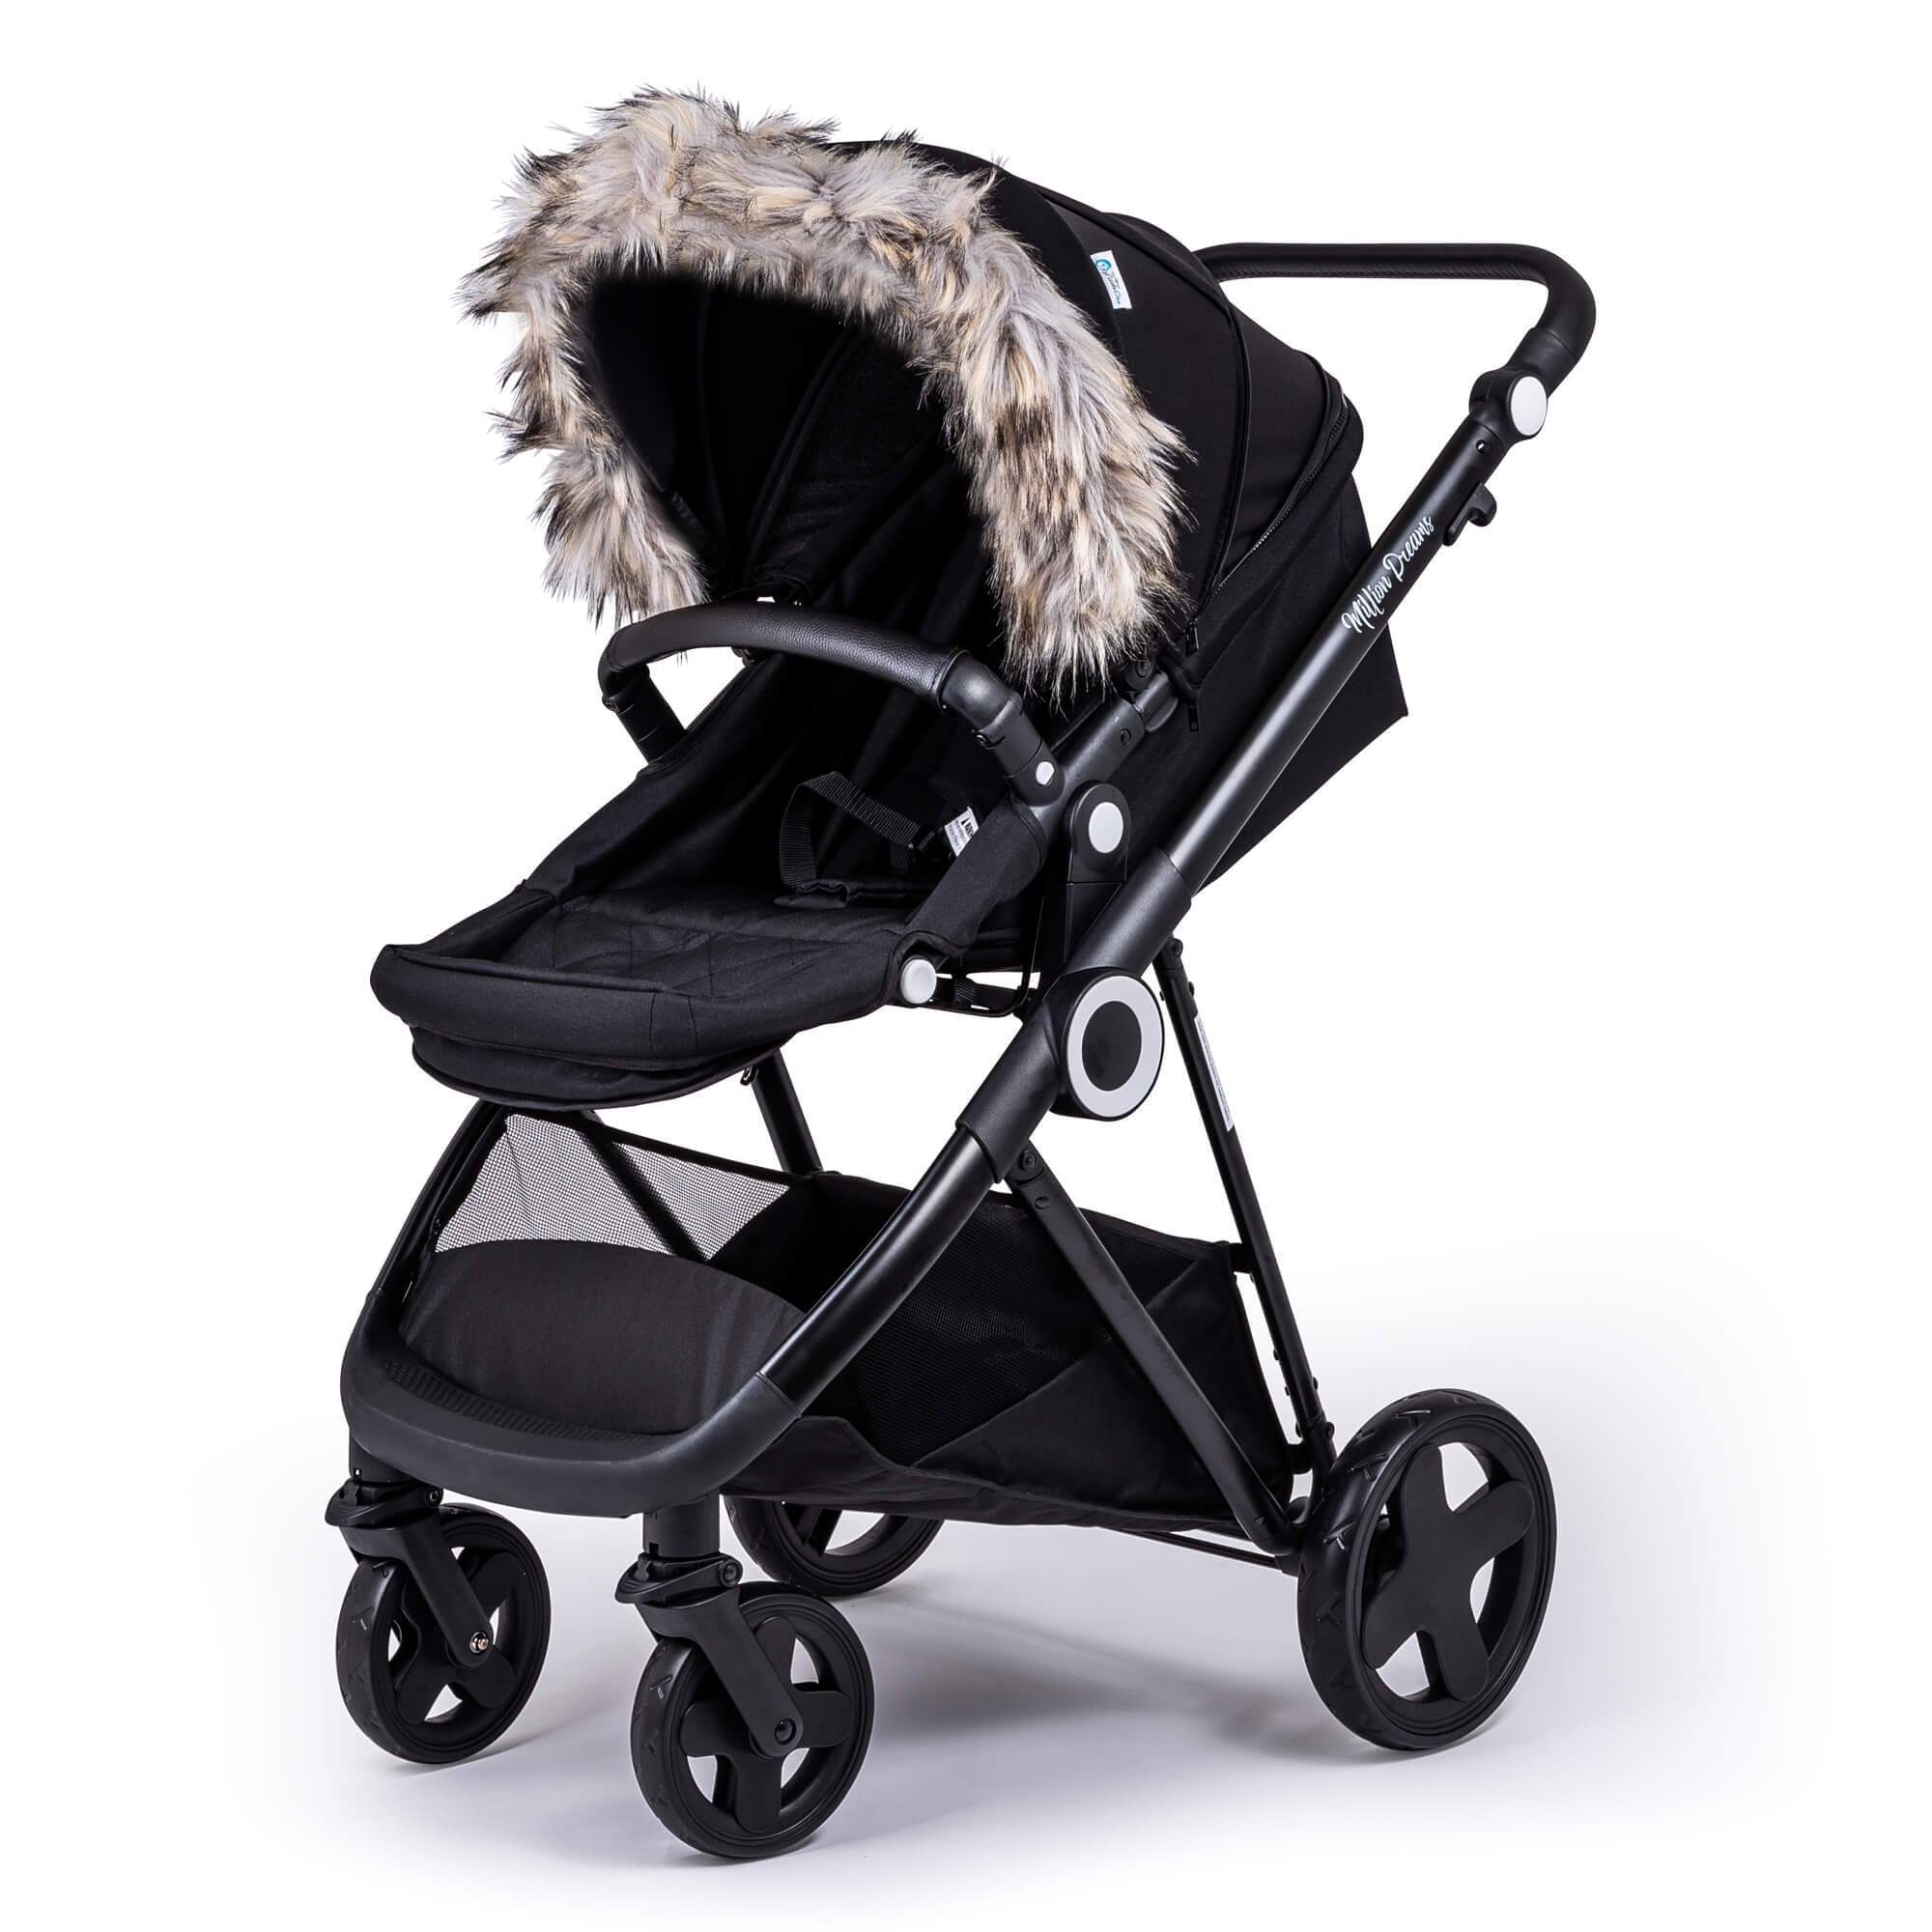 Pram Fur Hood Trim Attachment for Pushchair Compatible with DoBuggy - Light Grey / Fits All Models | For Your Little One